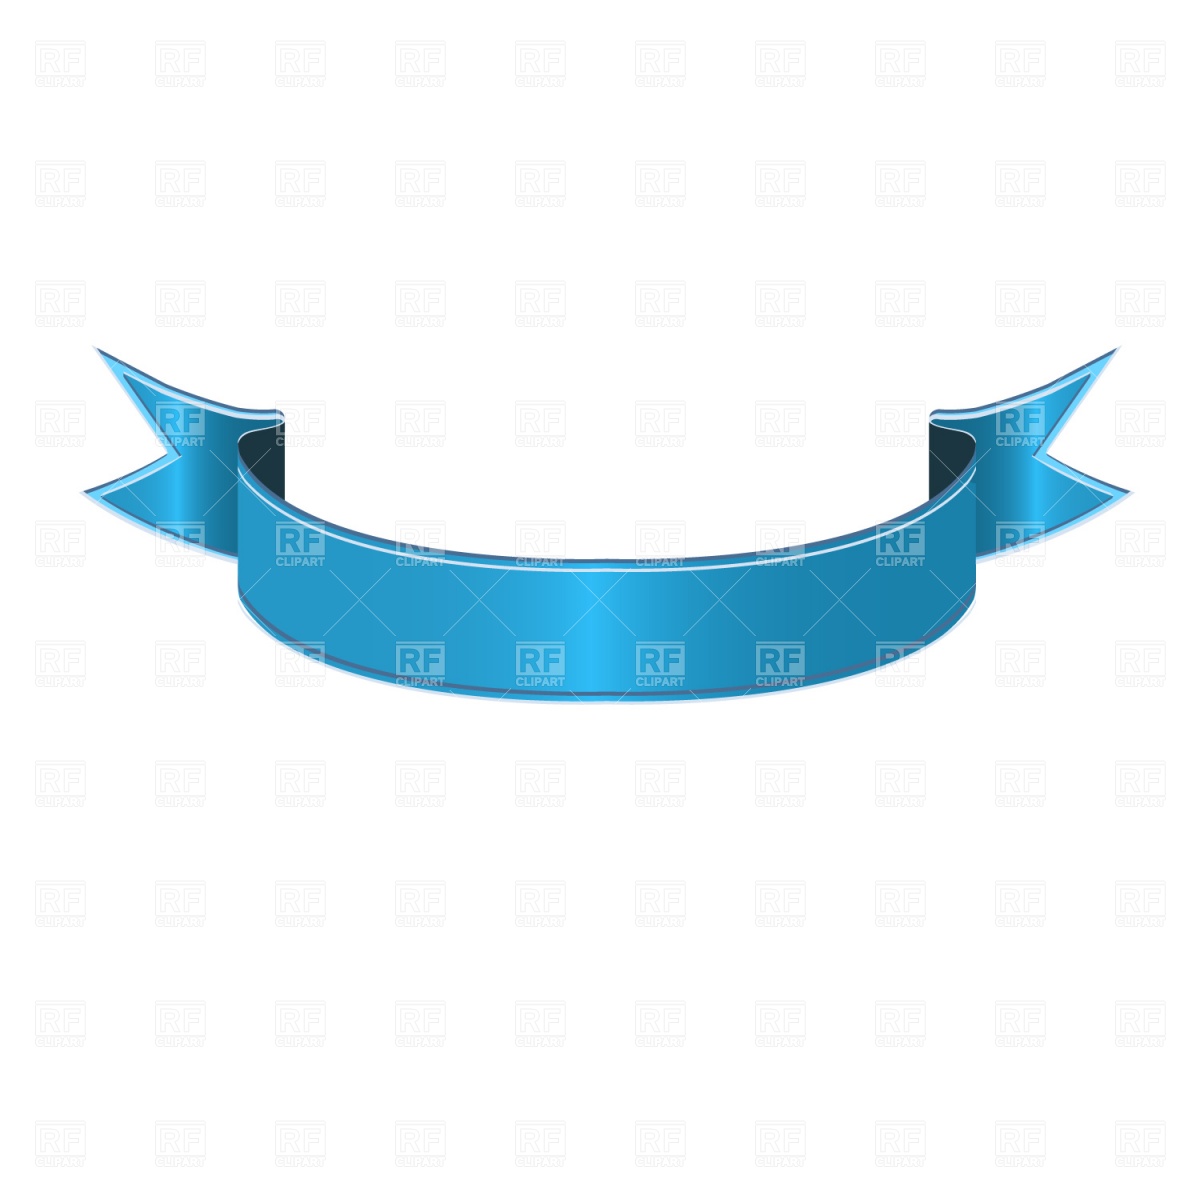 Blue Curved Ribbon 1277 Download Royalty Free Vector Clipart  Eps 